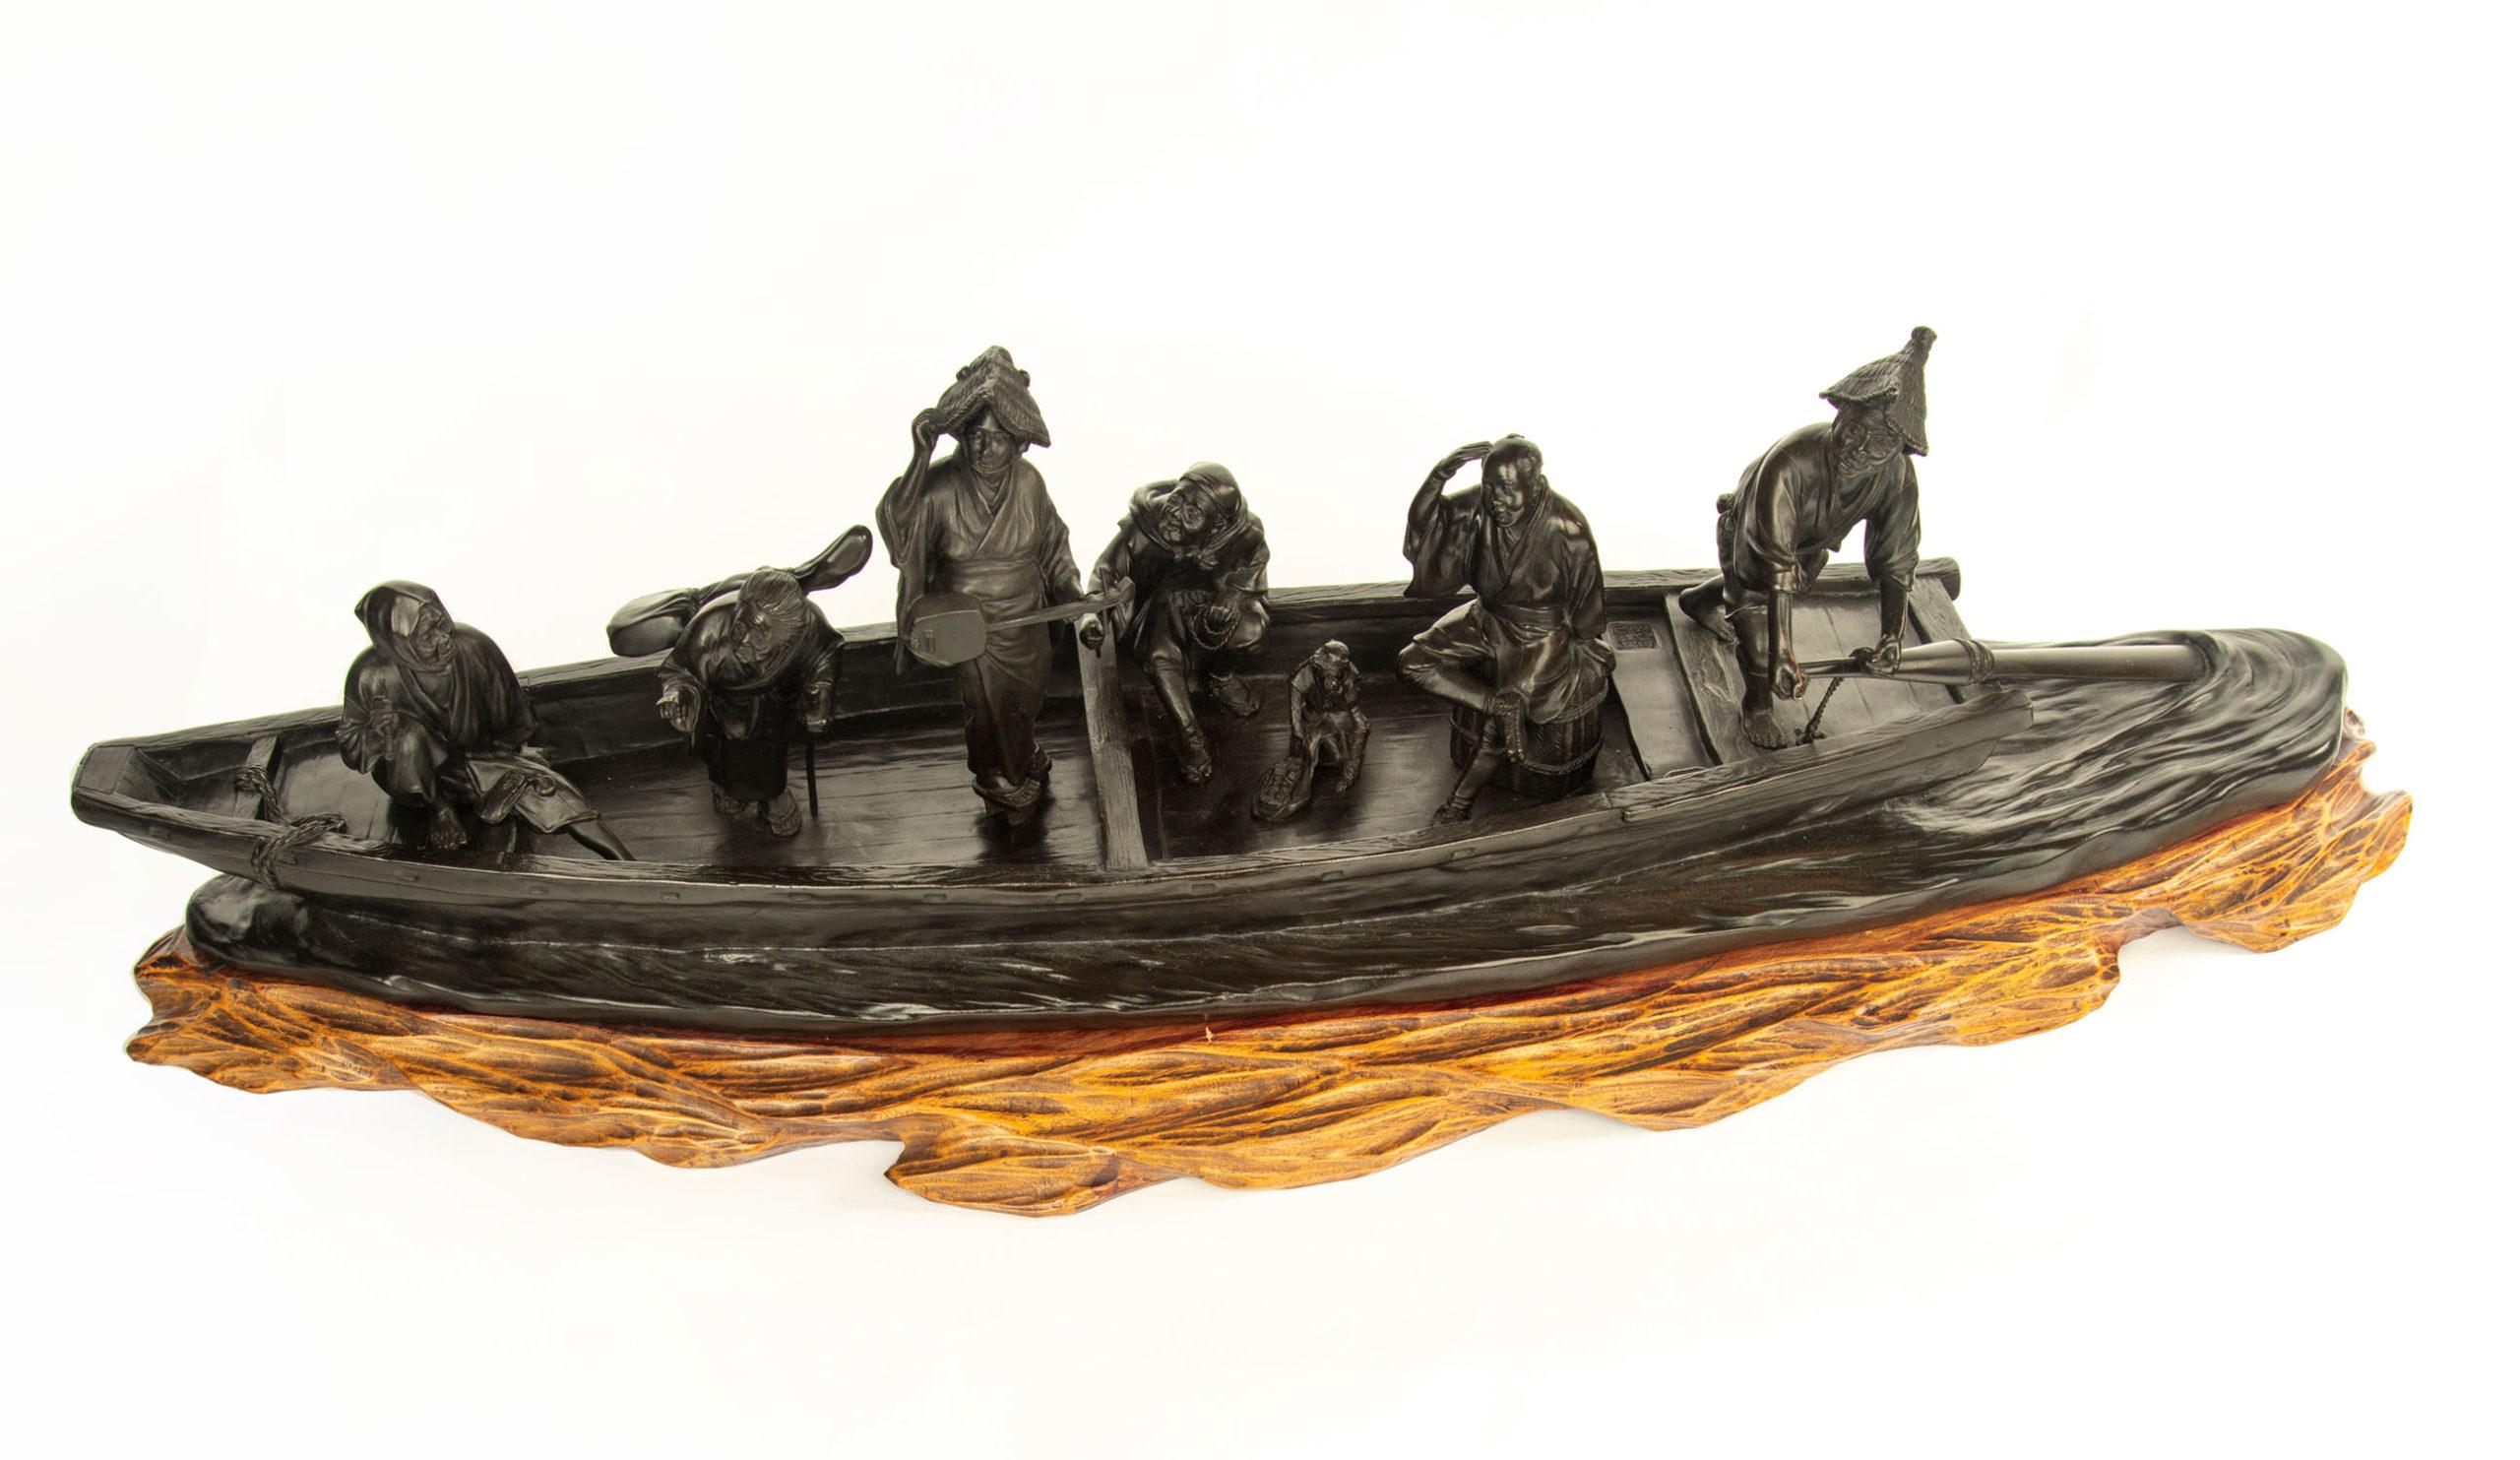 As part of our Japanese works of art collection we are delighted to offer this most unusual large scale Meiji Period 1868-1912, bronze casting of a wooden ferry boat carrying passengers upon a river, this most unusual casting stems from the foundry